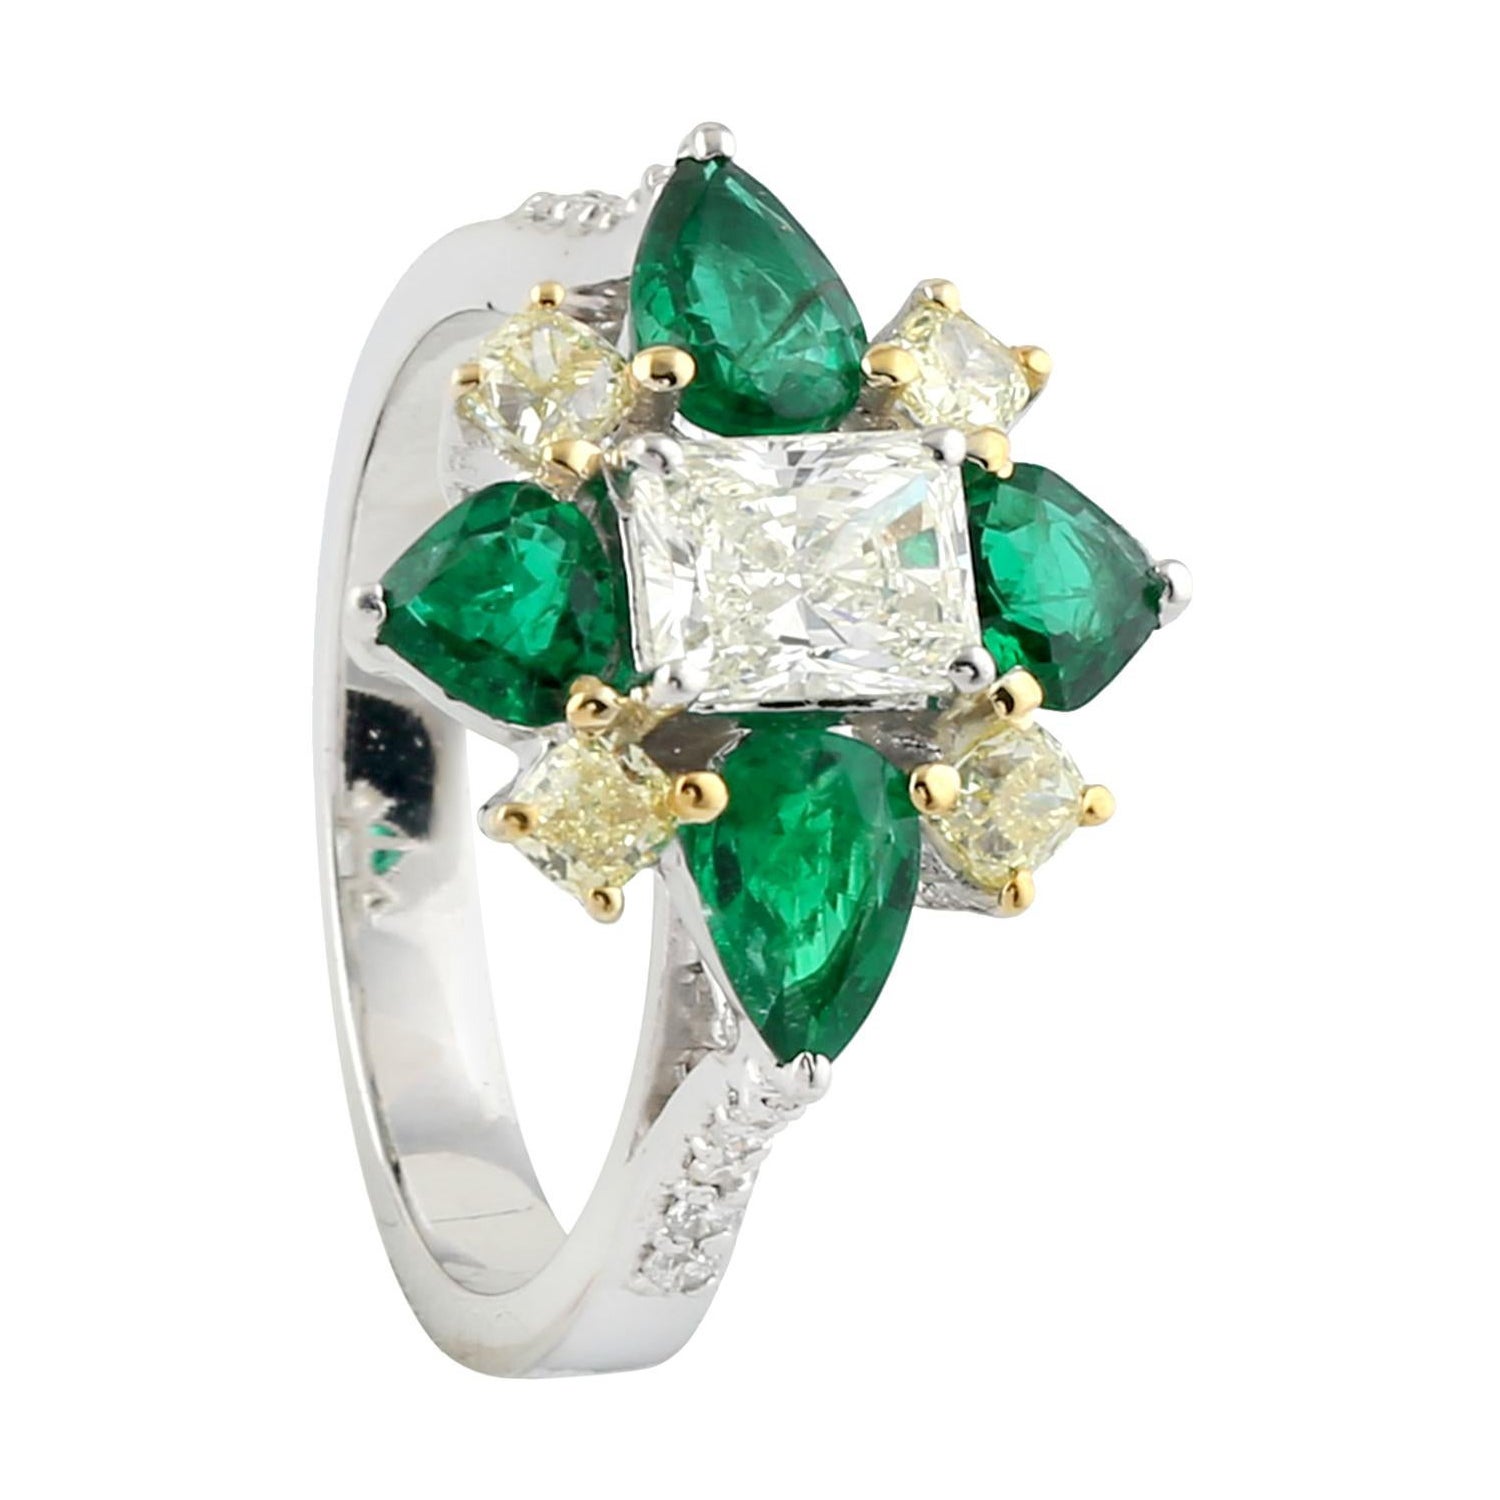 1.14 ct Pear Shaped Zambian Emeralds Flower Ring with Diamonds In 18k White Gold For Sale